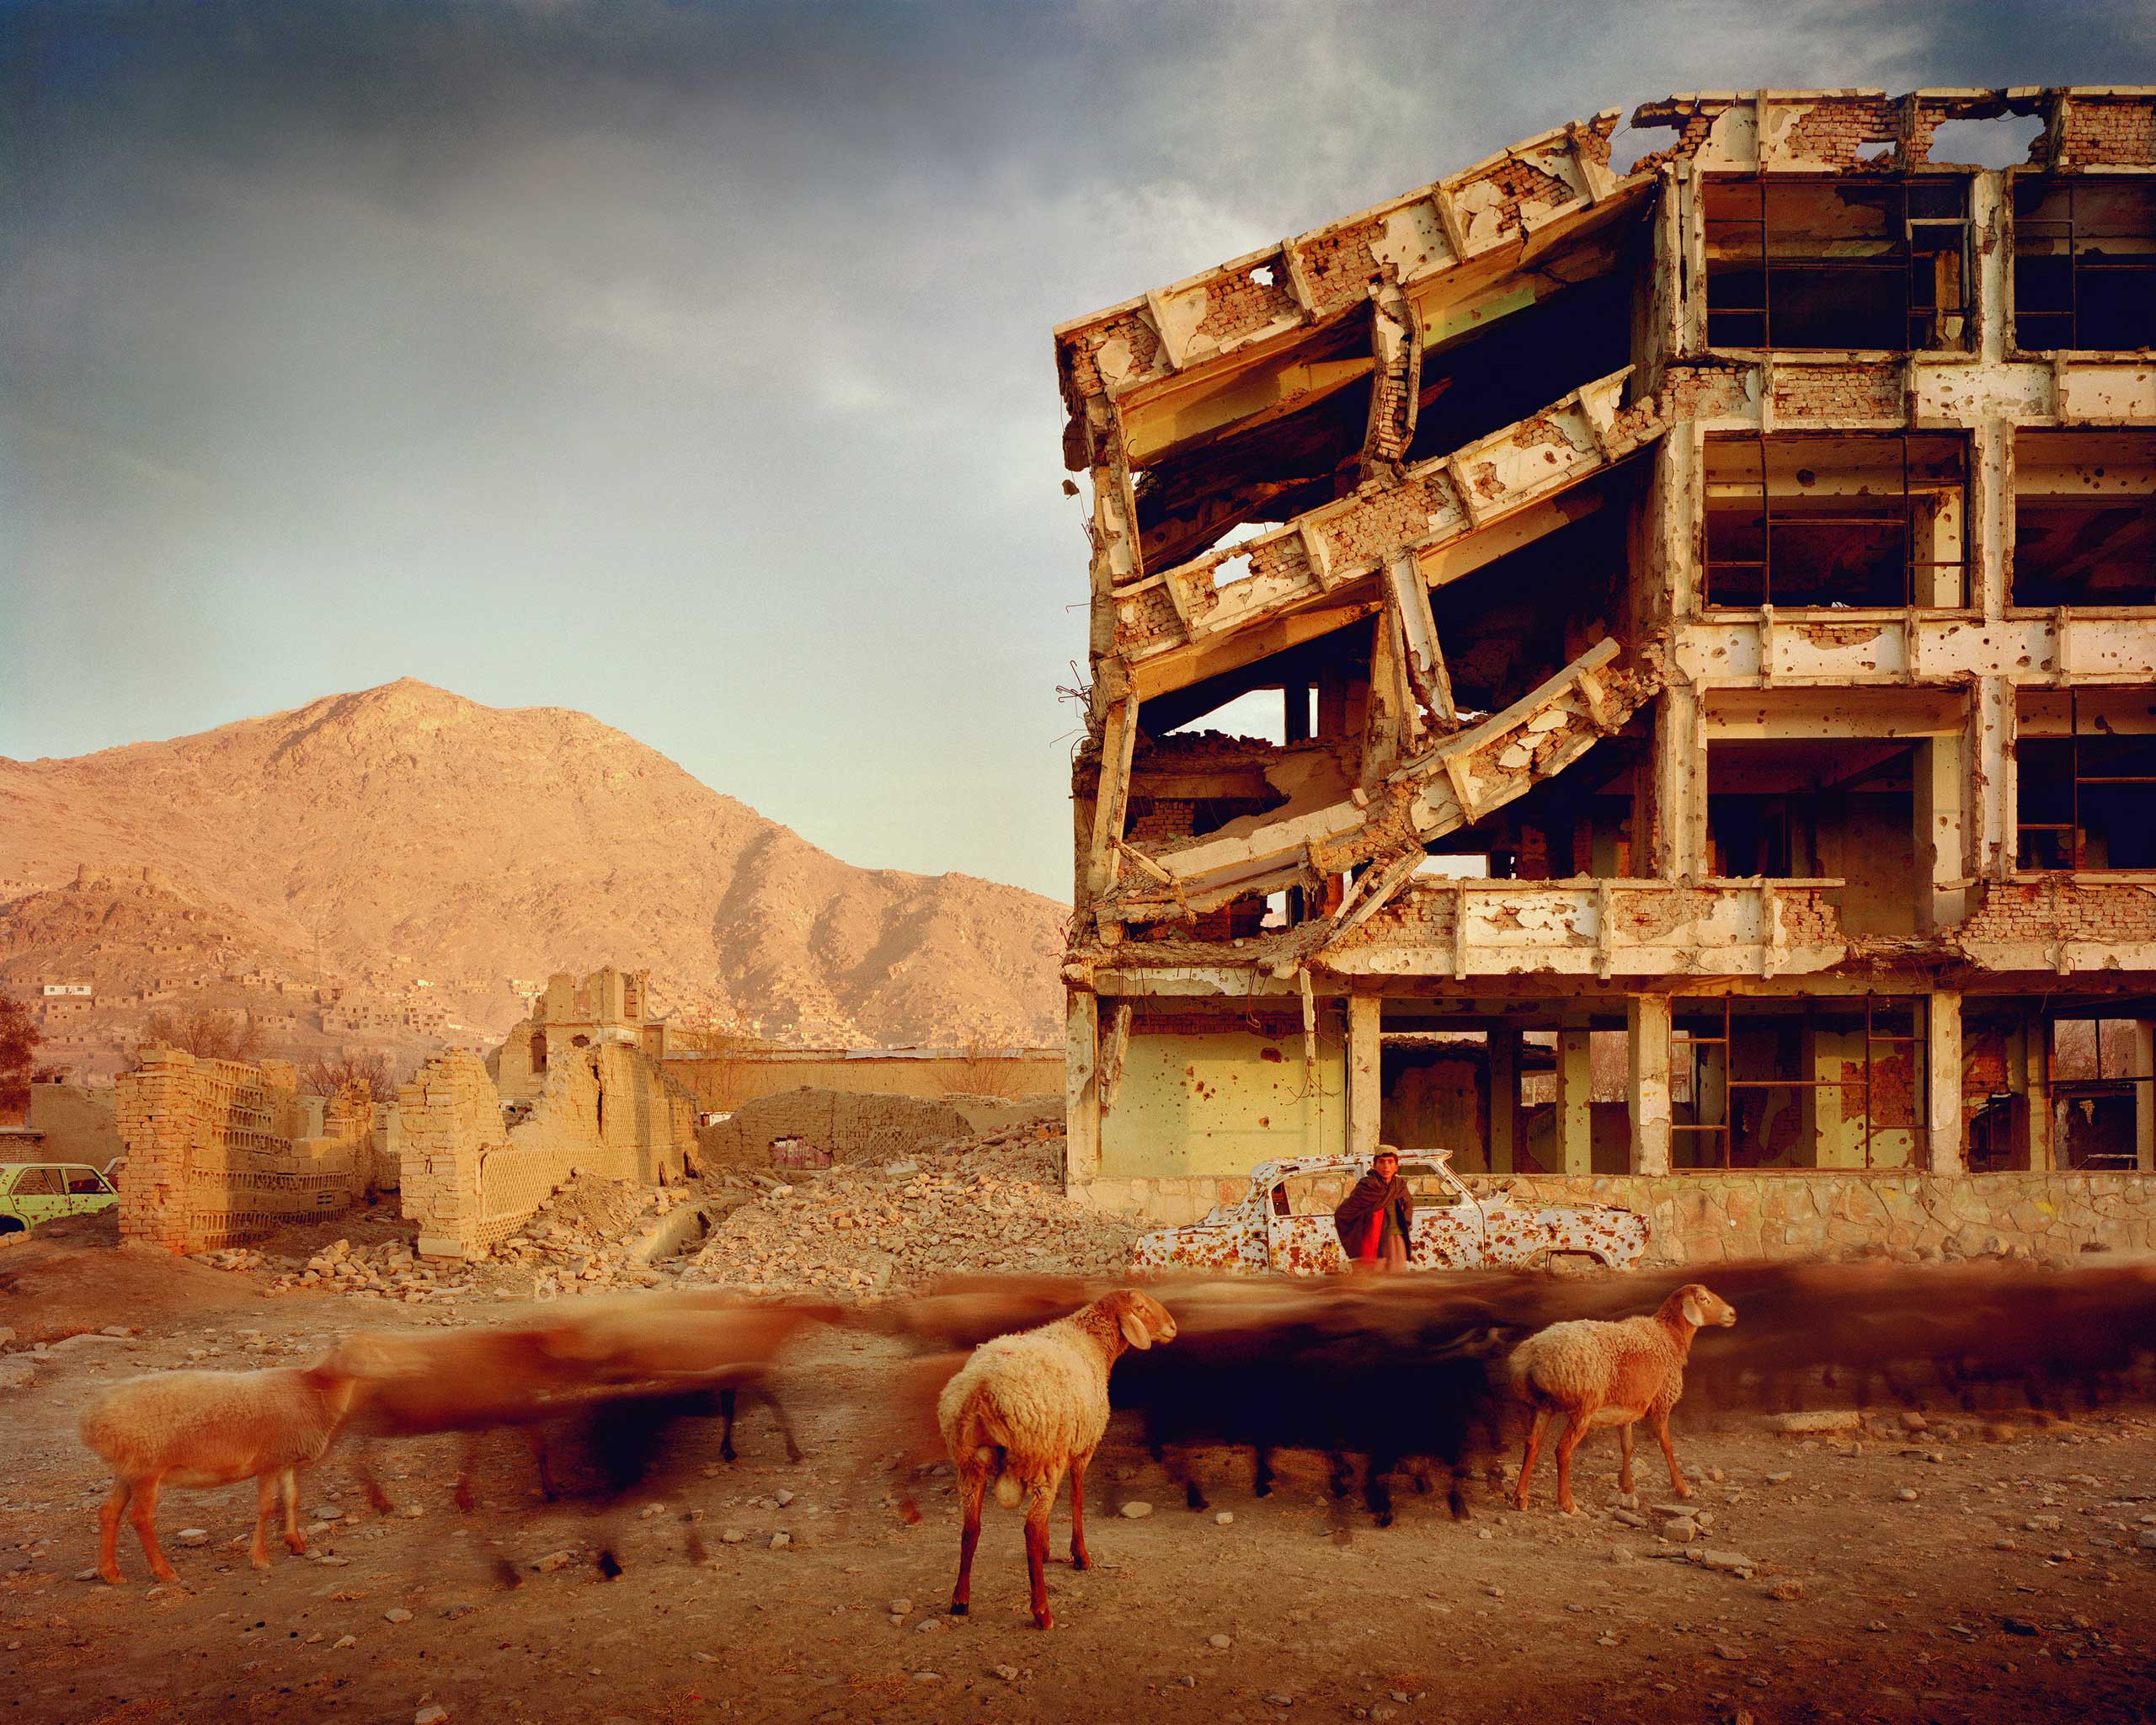 Phaidon blog: War’s effect on peace is examined in new Tate showBullet-scarred apartment building and shops in the Karte Char district of Kabul, Afghanistan, 2003.